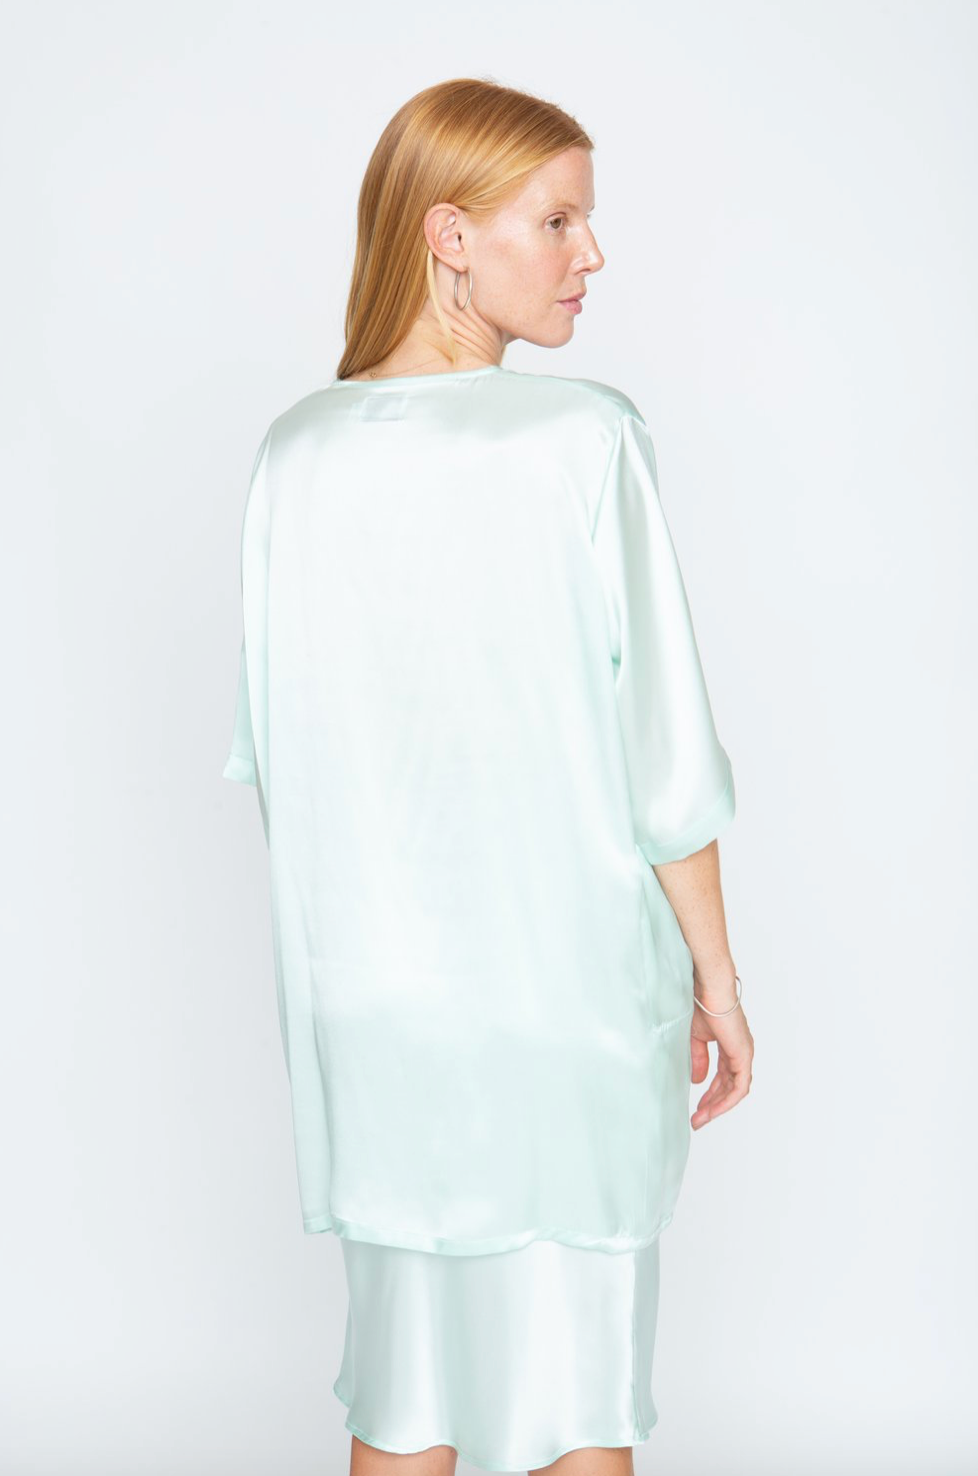 Lily Forbes - Milica Tie Top: Mint